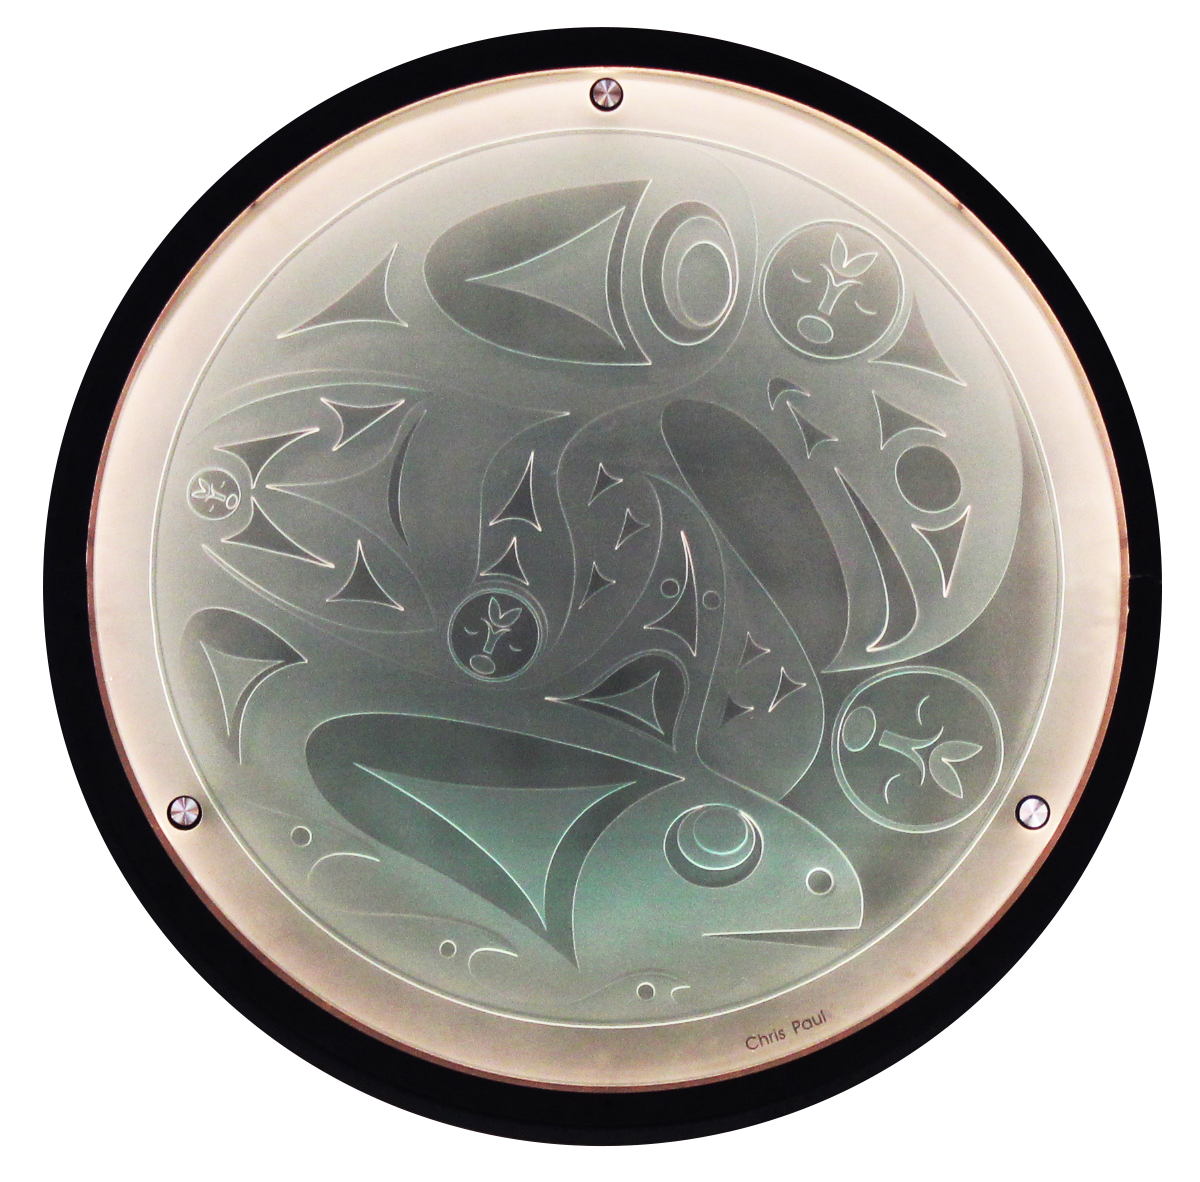 Round etched glass image with a wooden mounting, done in a First Nations style